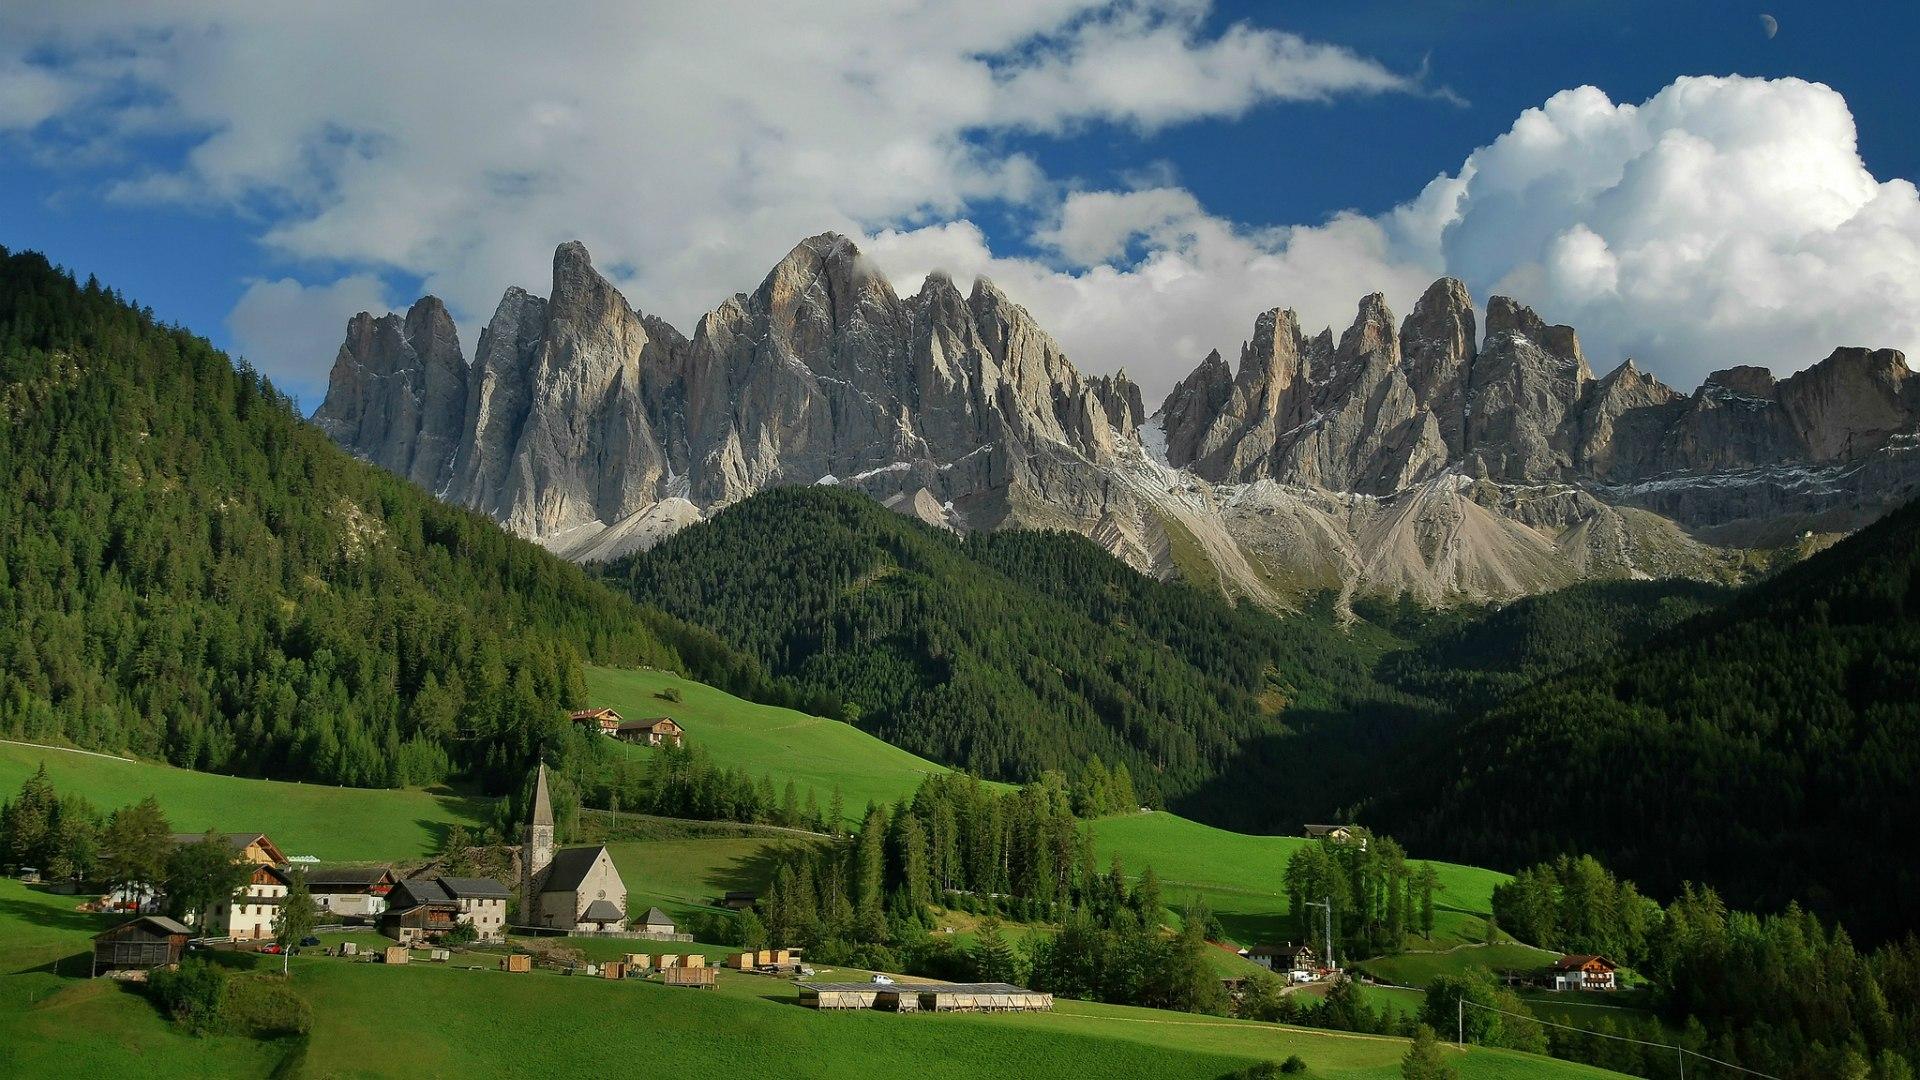 Dolomites Mountains, Italy wallpaper and image, picture, photo